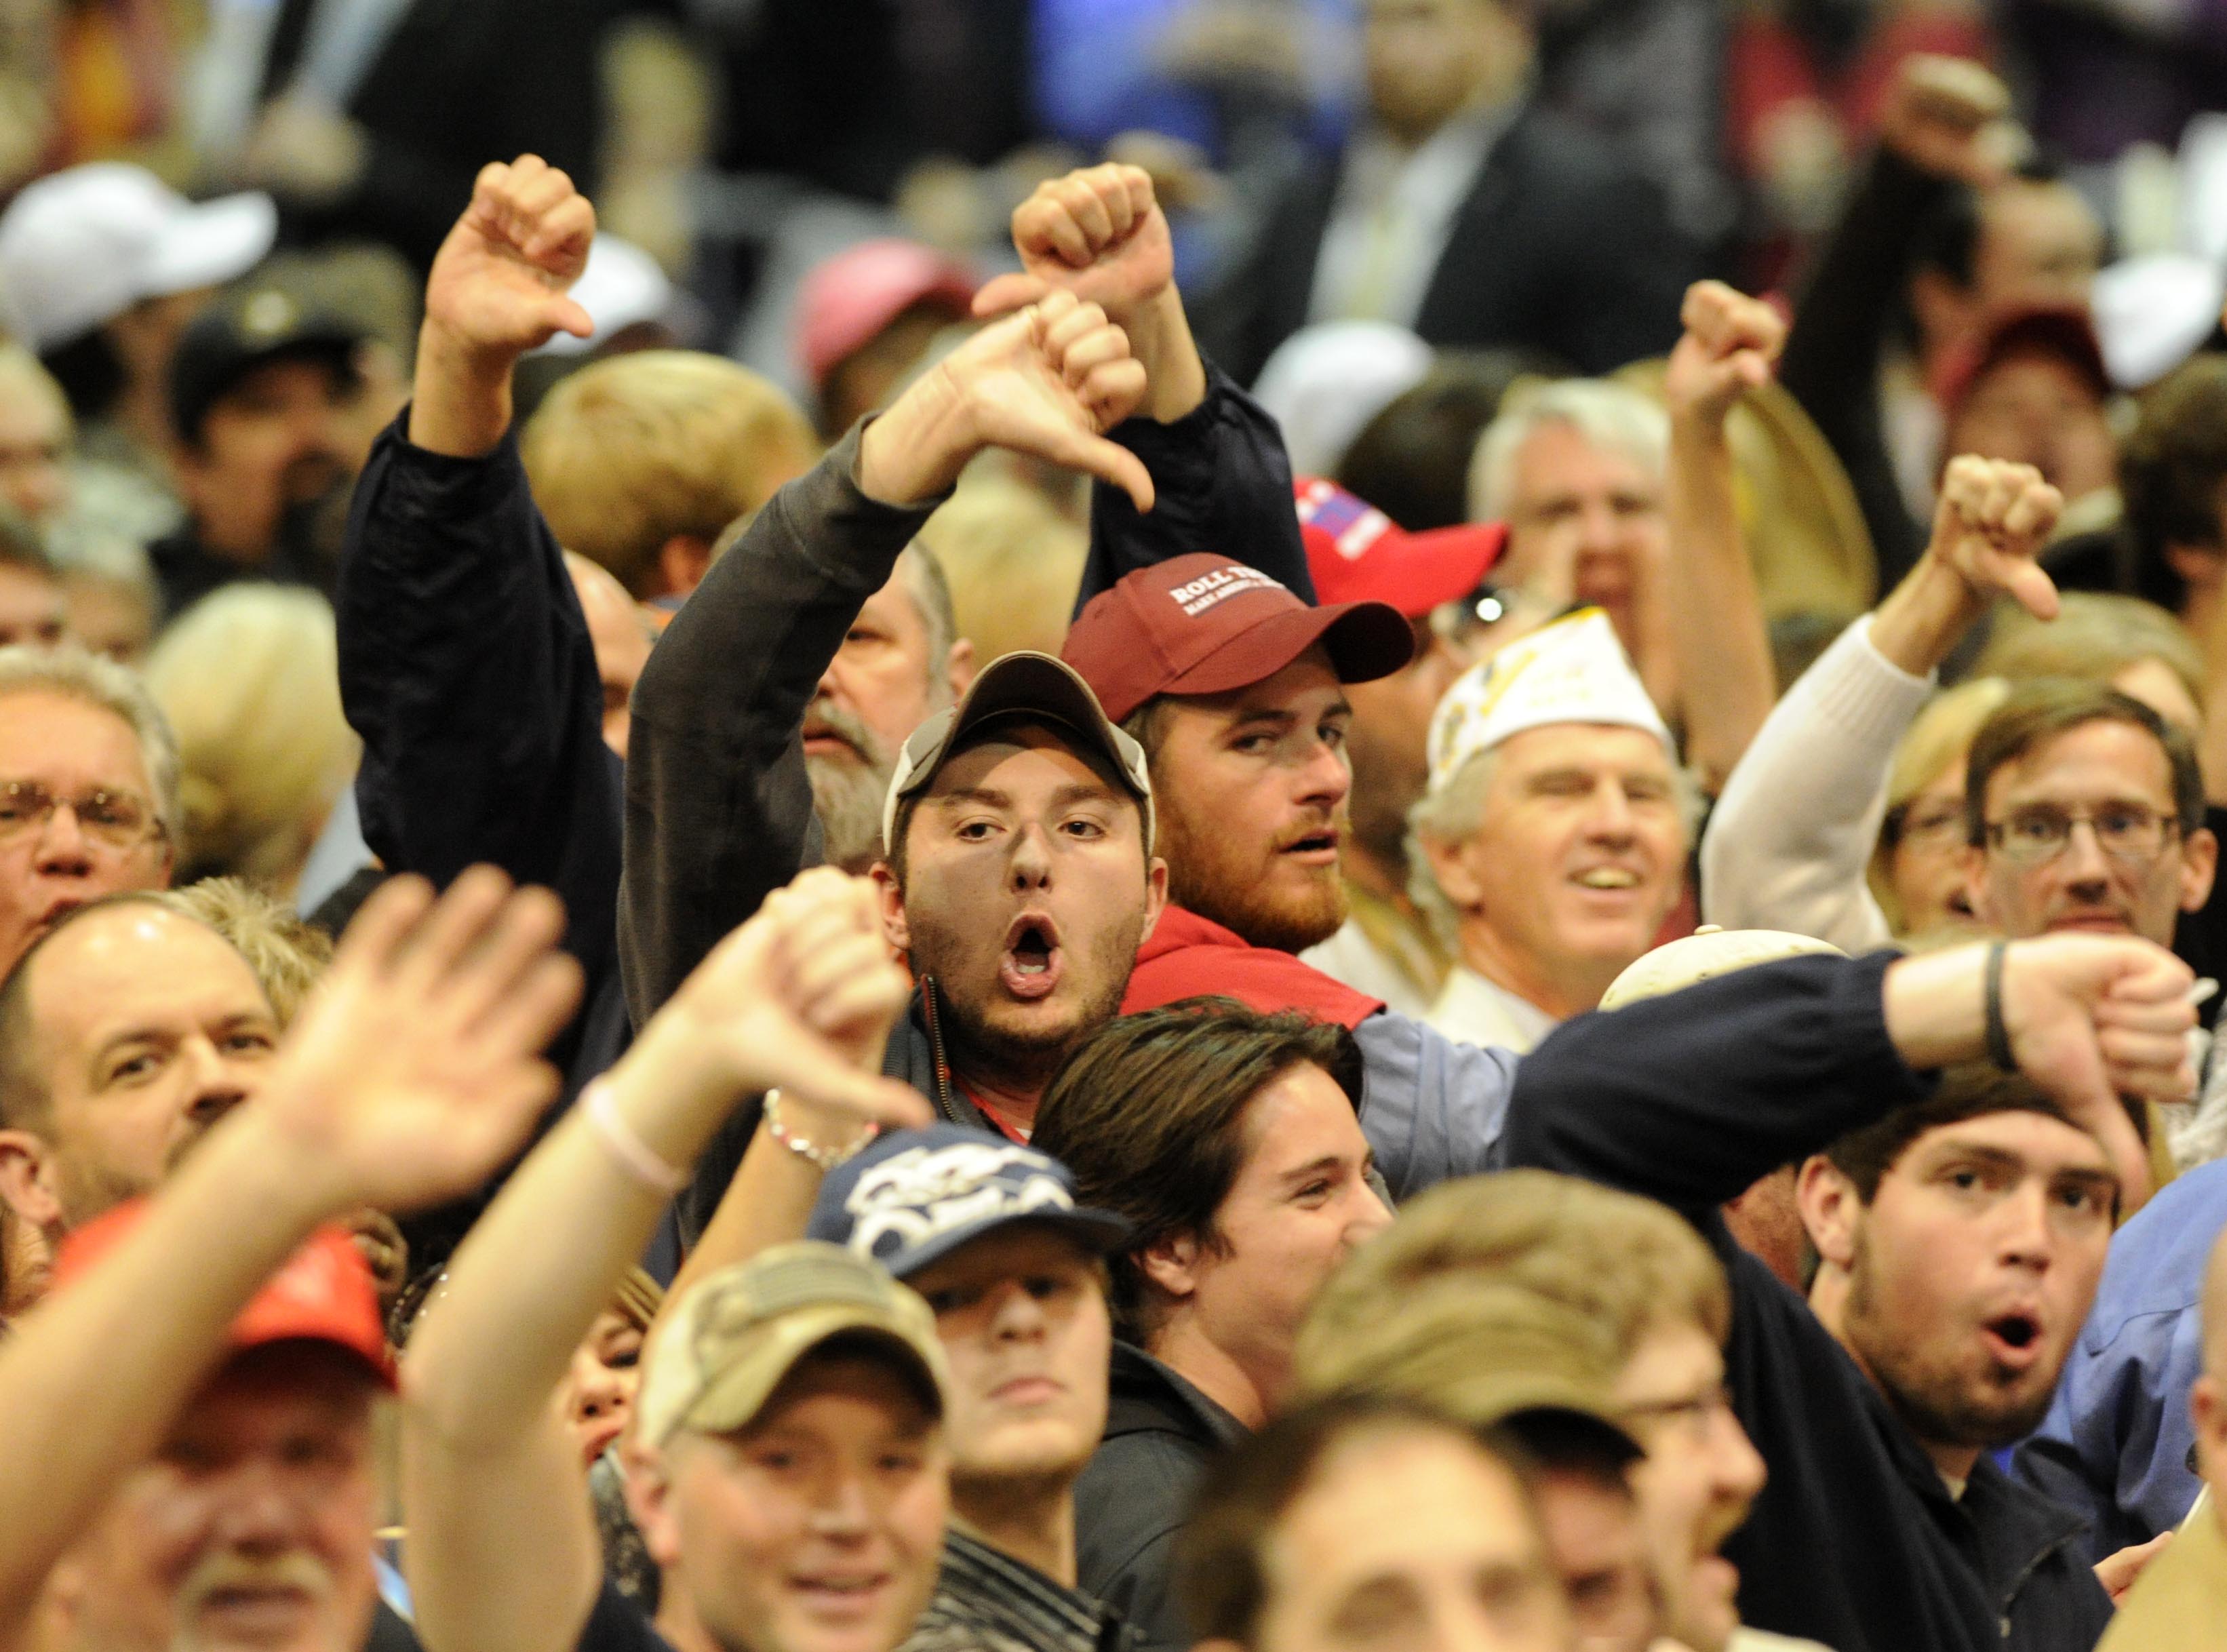 Trump supporters 'boo' the media after a heckler was removed as Republican presidential candidate Donald Trump speaks during a campaign stop Saturday, Nov. 21, 2015 in Birmingham, Ala. (AP Photo/Eric Schultz)